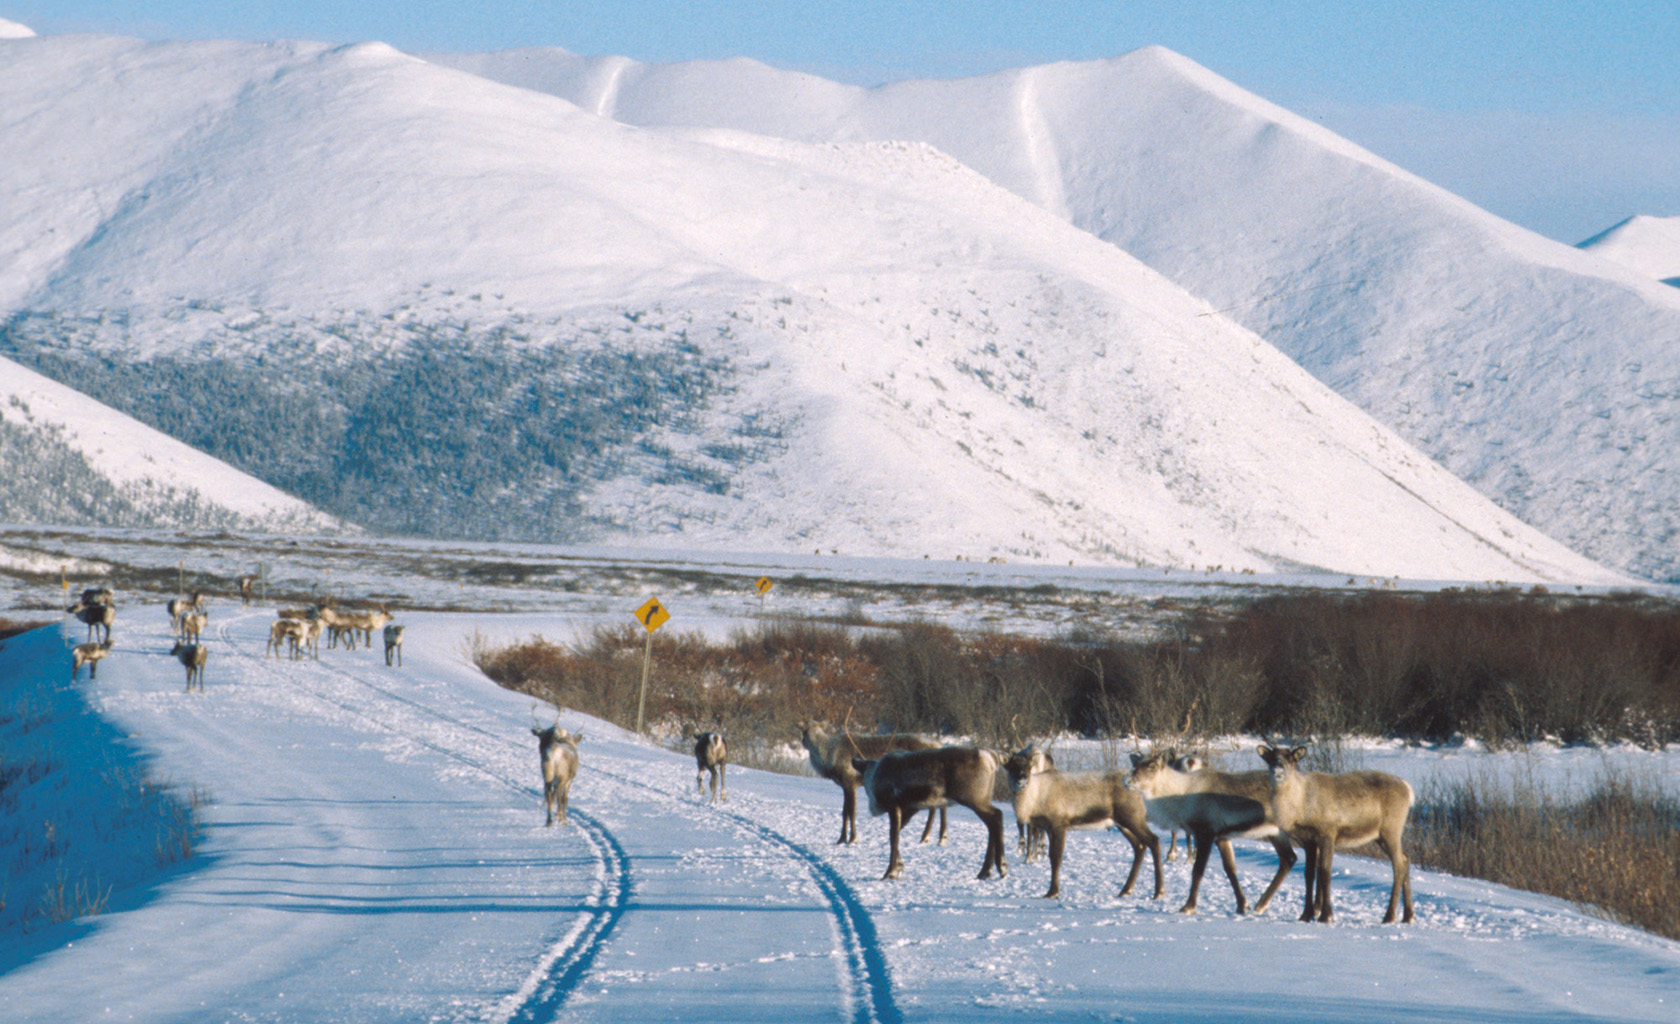 Caribou on the Dempster Highway in the Yukon, Canada